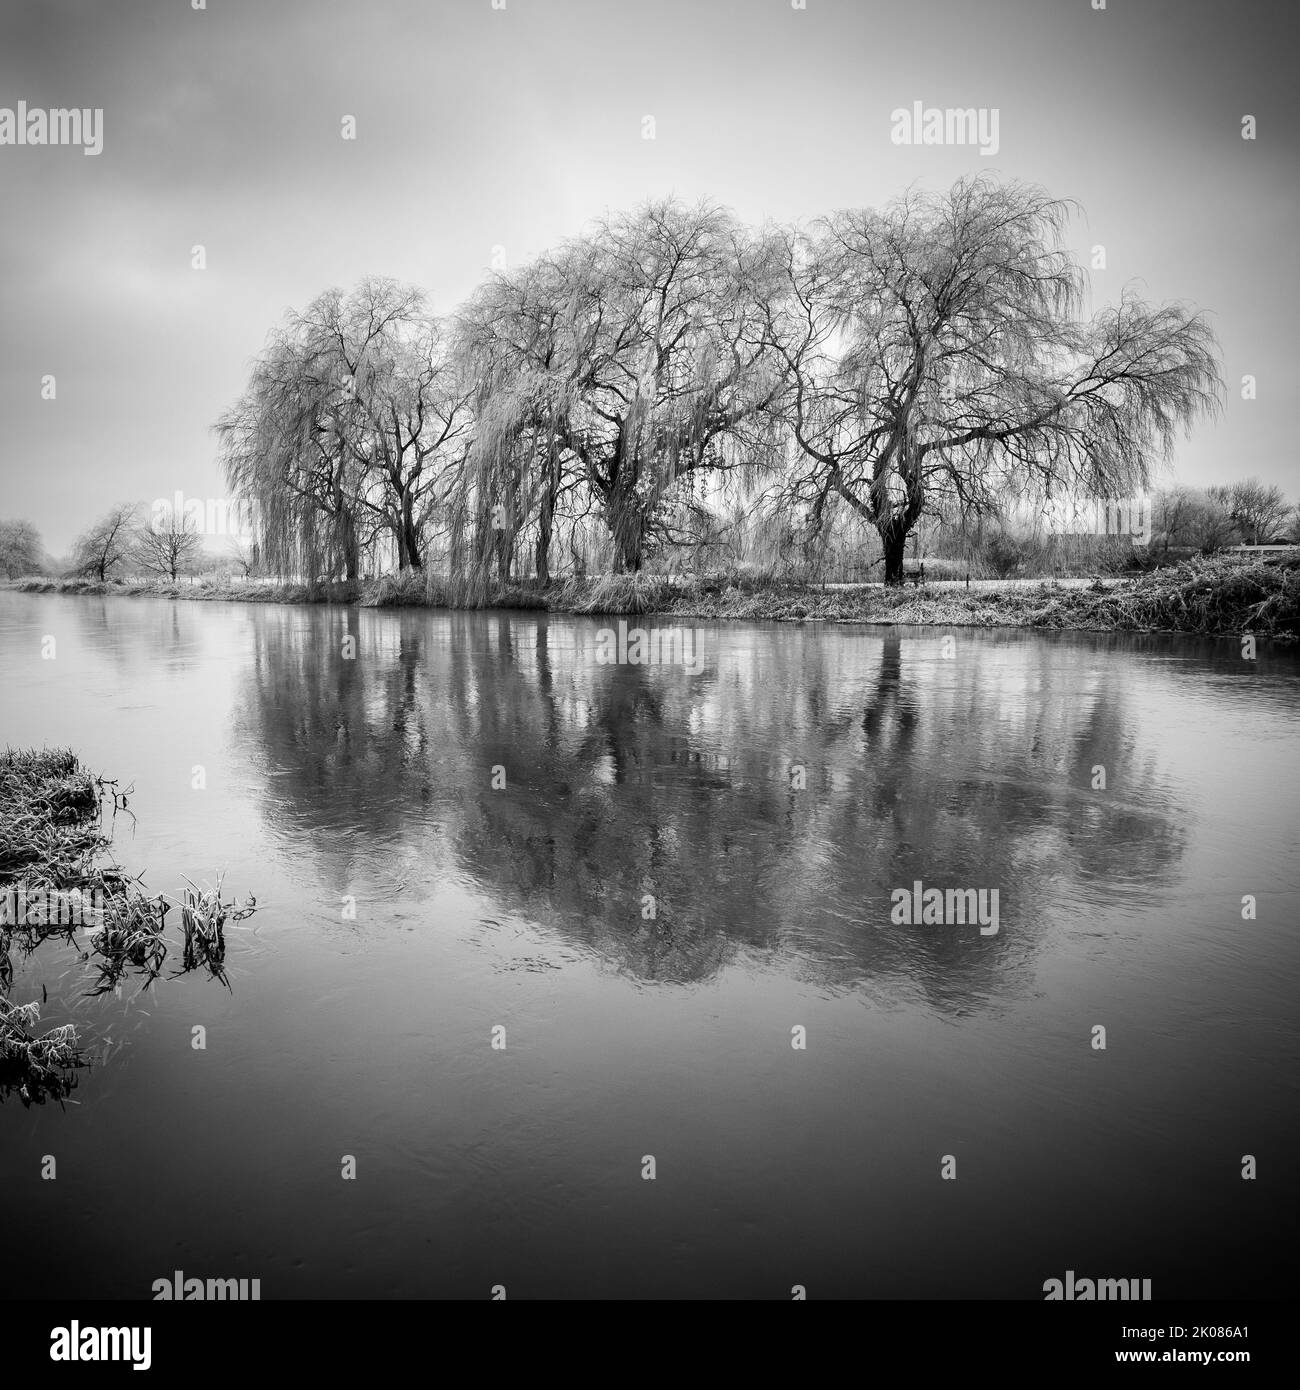 Row of 3 trees with reflection in river, black and white Stock Photo